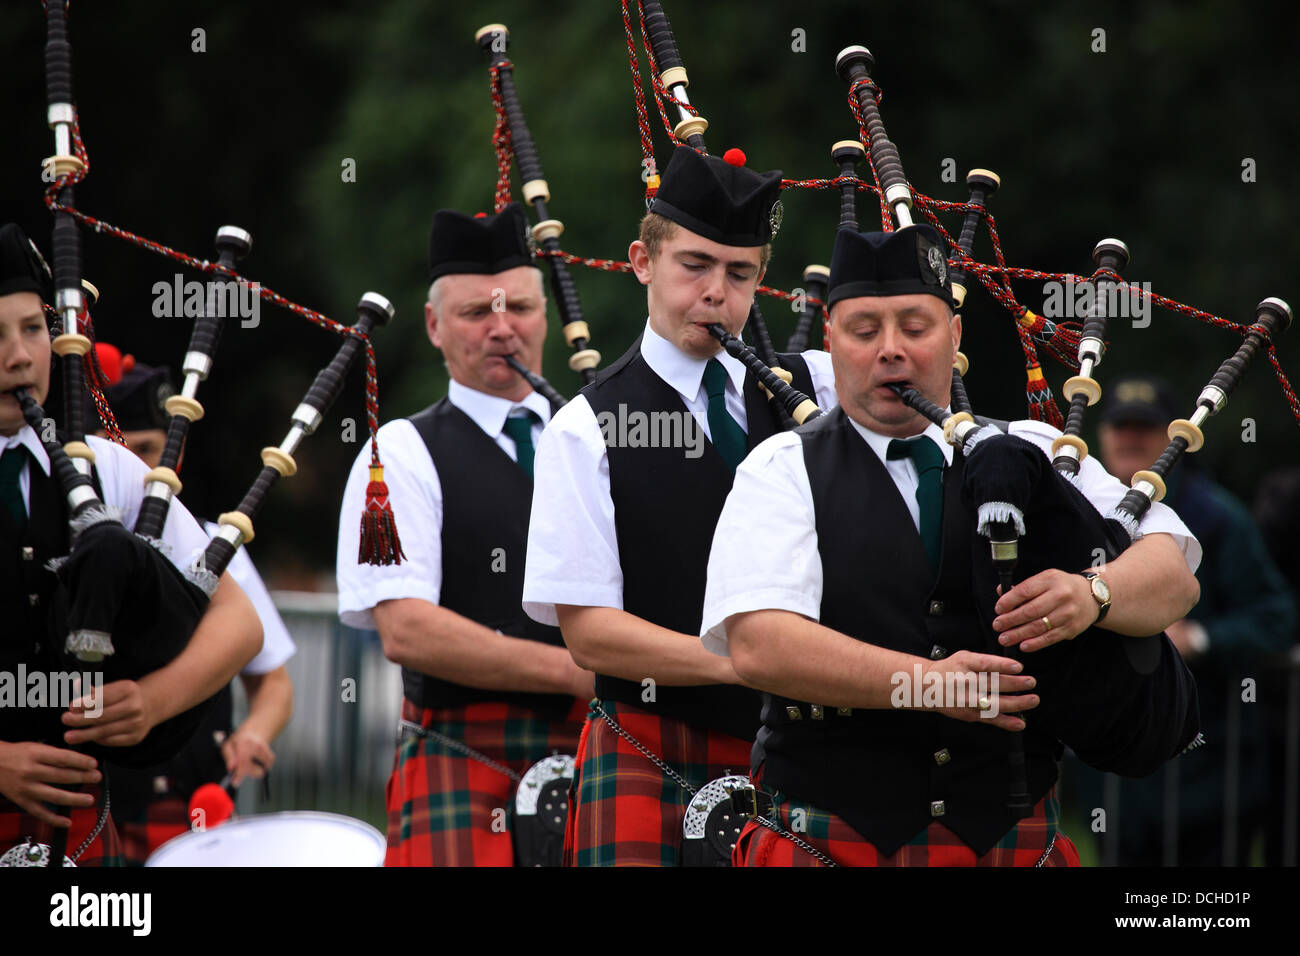 Pipers from the Mull and Iona Pipe Band playing at the 67th World Pipe Band Championships for the first time. The 2013 event was held at Glasgow Green where more than 200 pipe bands attended. Credit:  PictureScotland/Alamy Live News Stock Photo